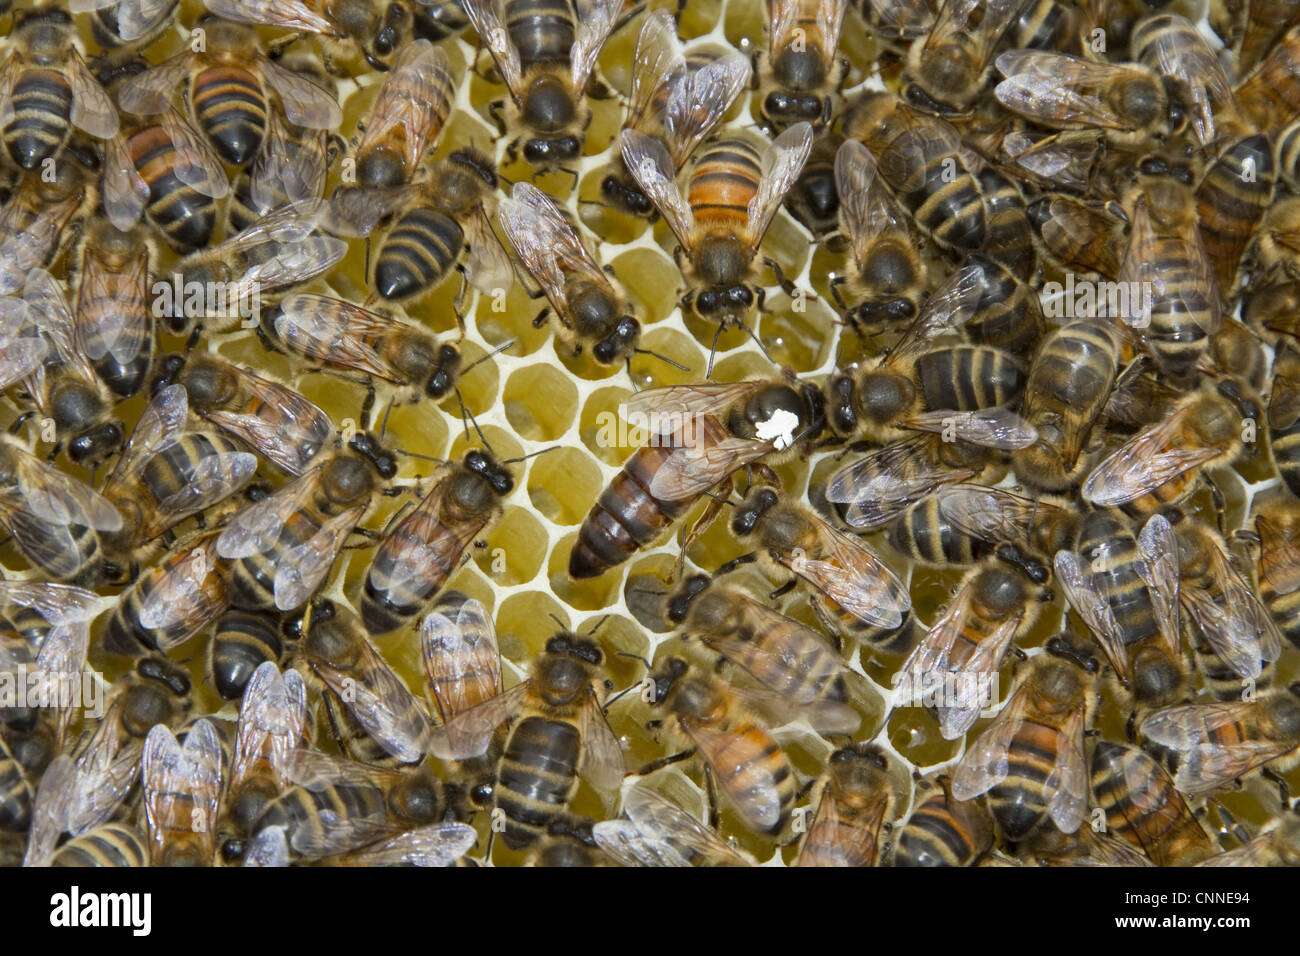 The queen bee marked white dot laying eggs queen cups virgin queen will develop fertilized egg young queen larva develops Stock Photo